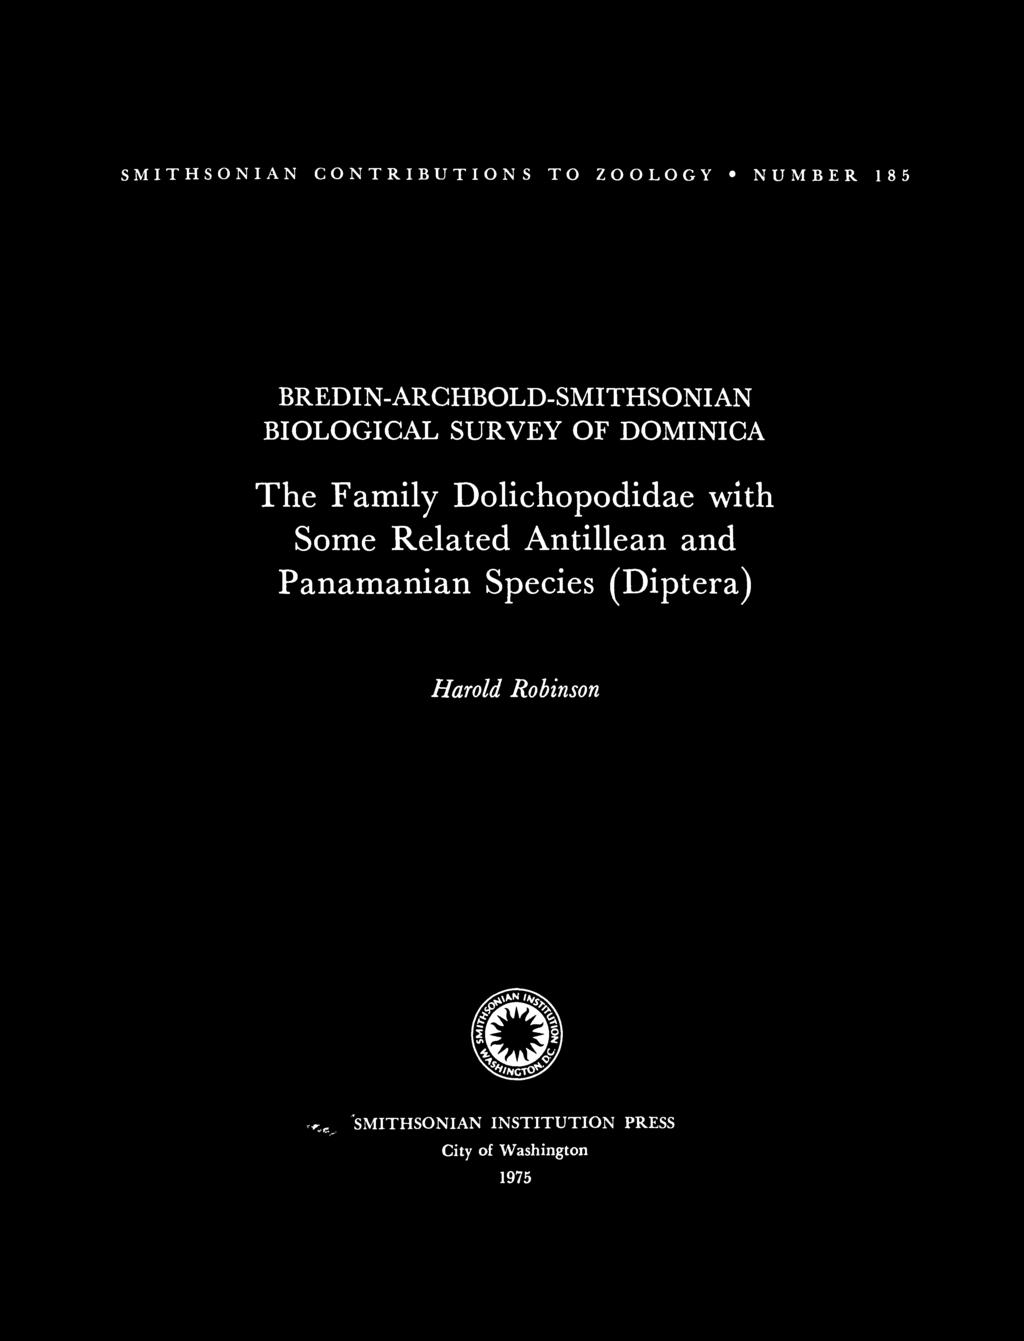 SMITHSONIAN CONTRIBUTIONS TO ZOOLOGY NUMBER 185 BREDIN-ARCHBOLD-SMITHSONIAN BIOLOGICAL SURVEY OF DOMINICA The Family